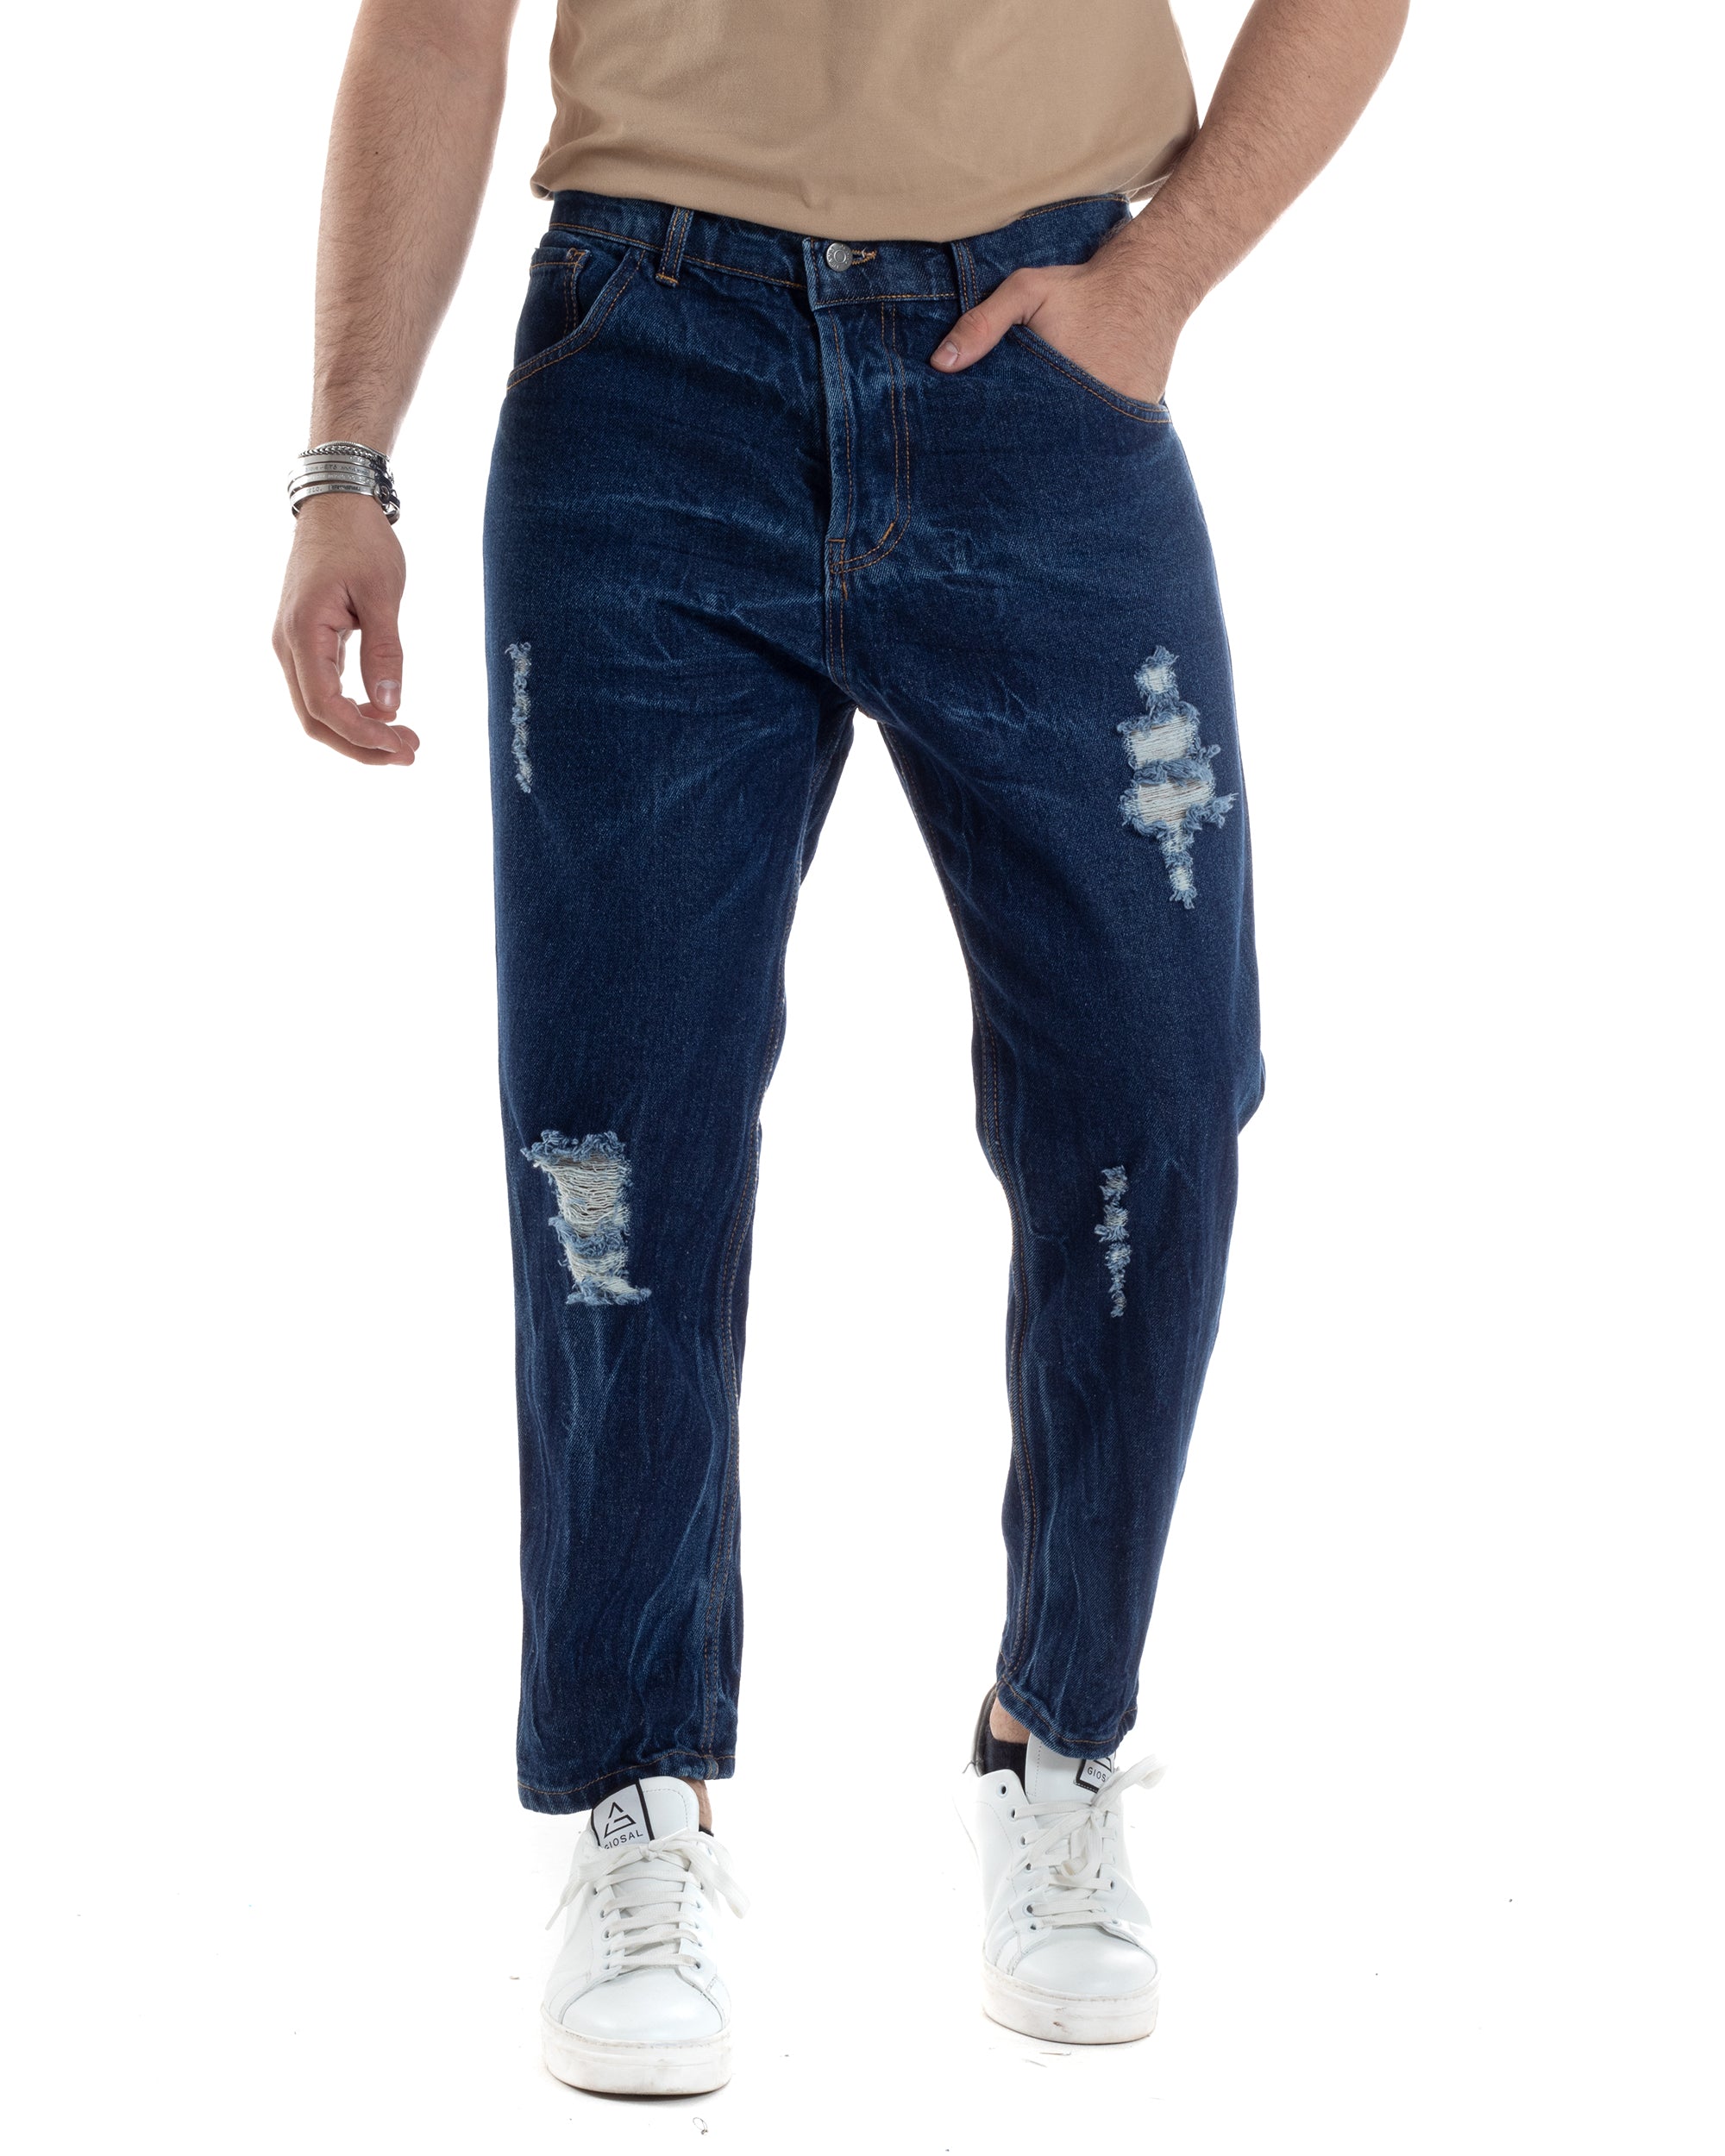 Men's Jeans Trousers Loose Fit Dark Denim With Rips Five Pockets GIOSAL-P5556A